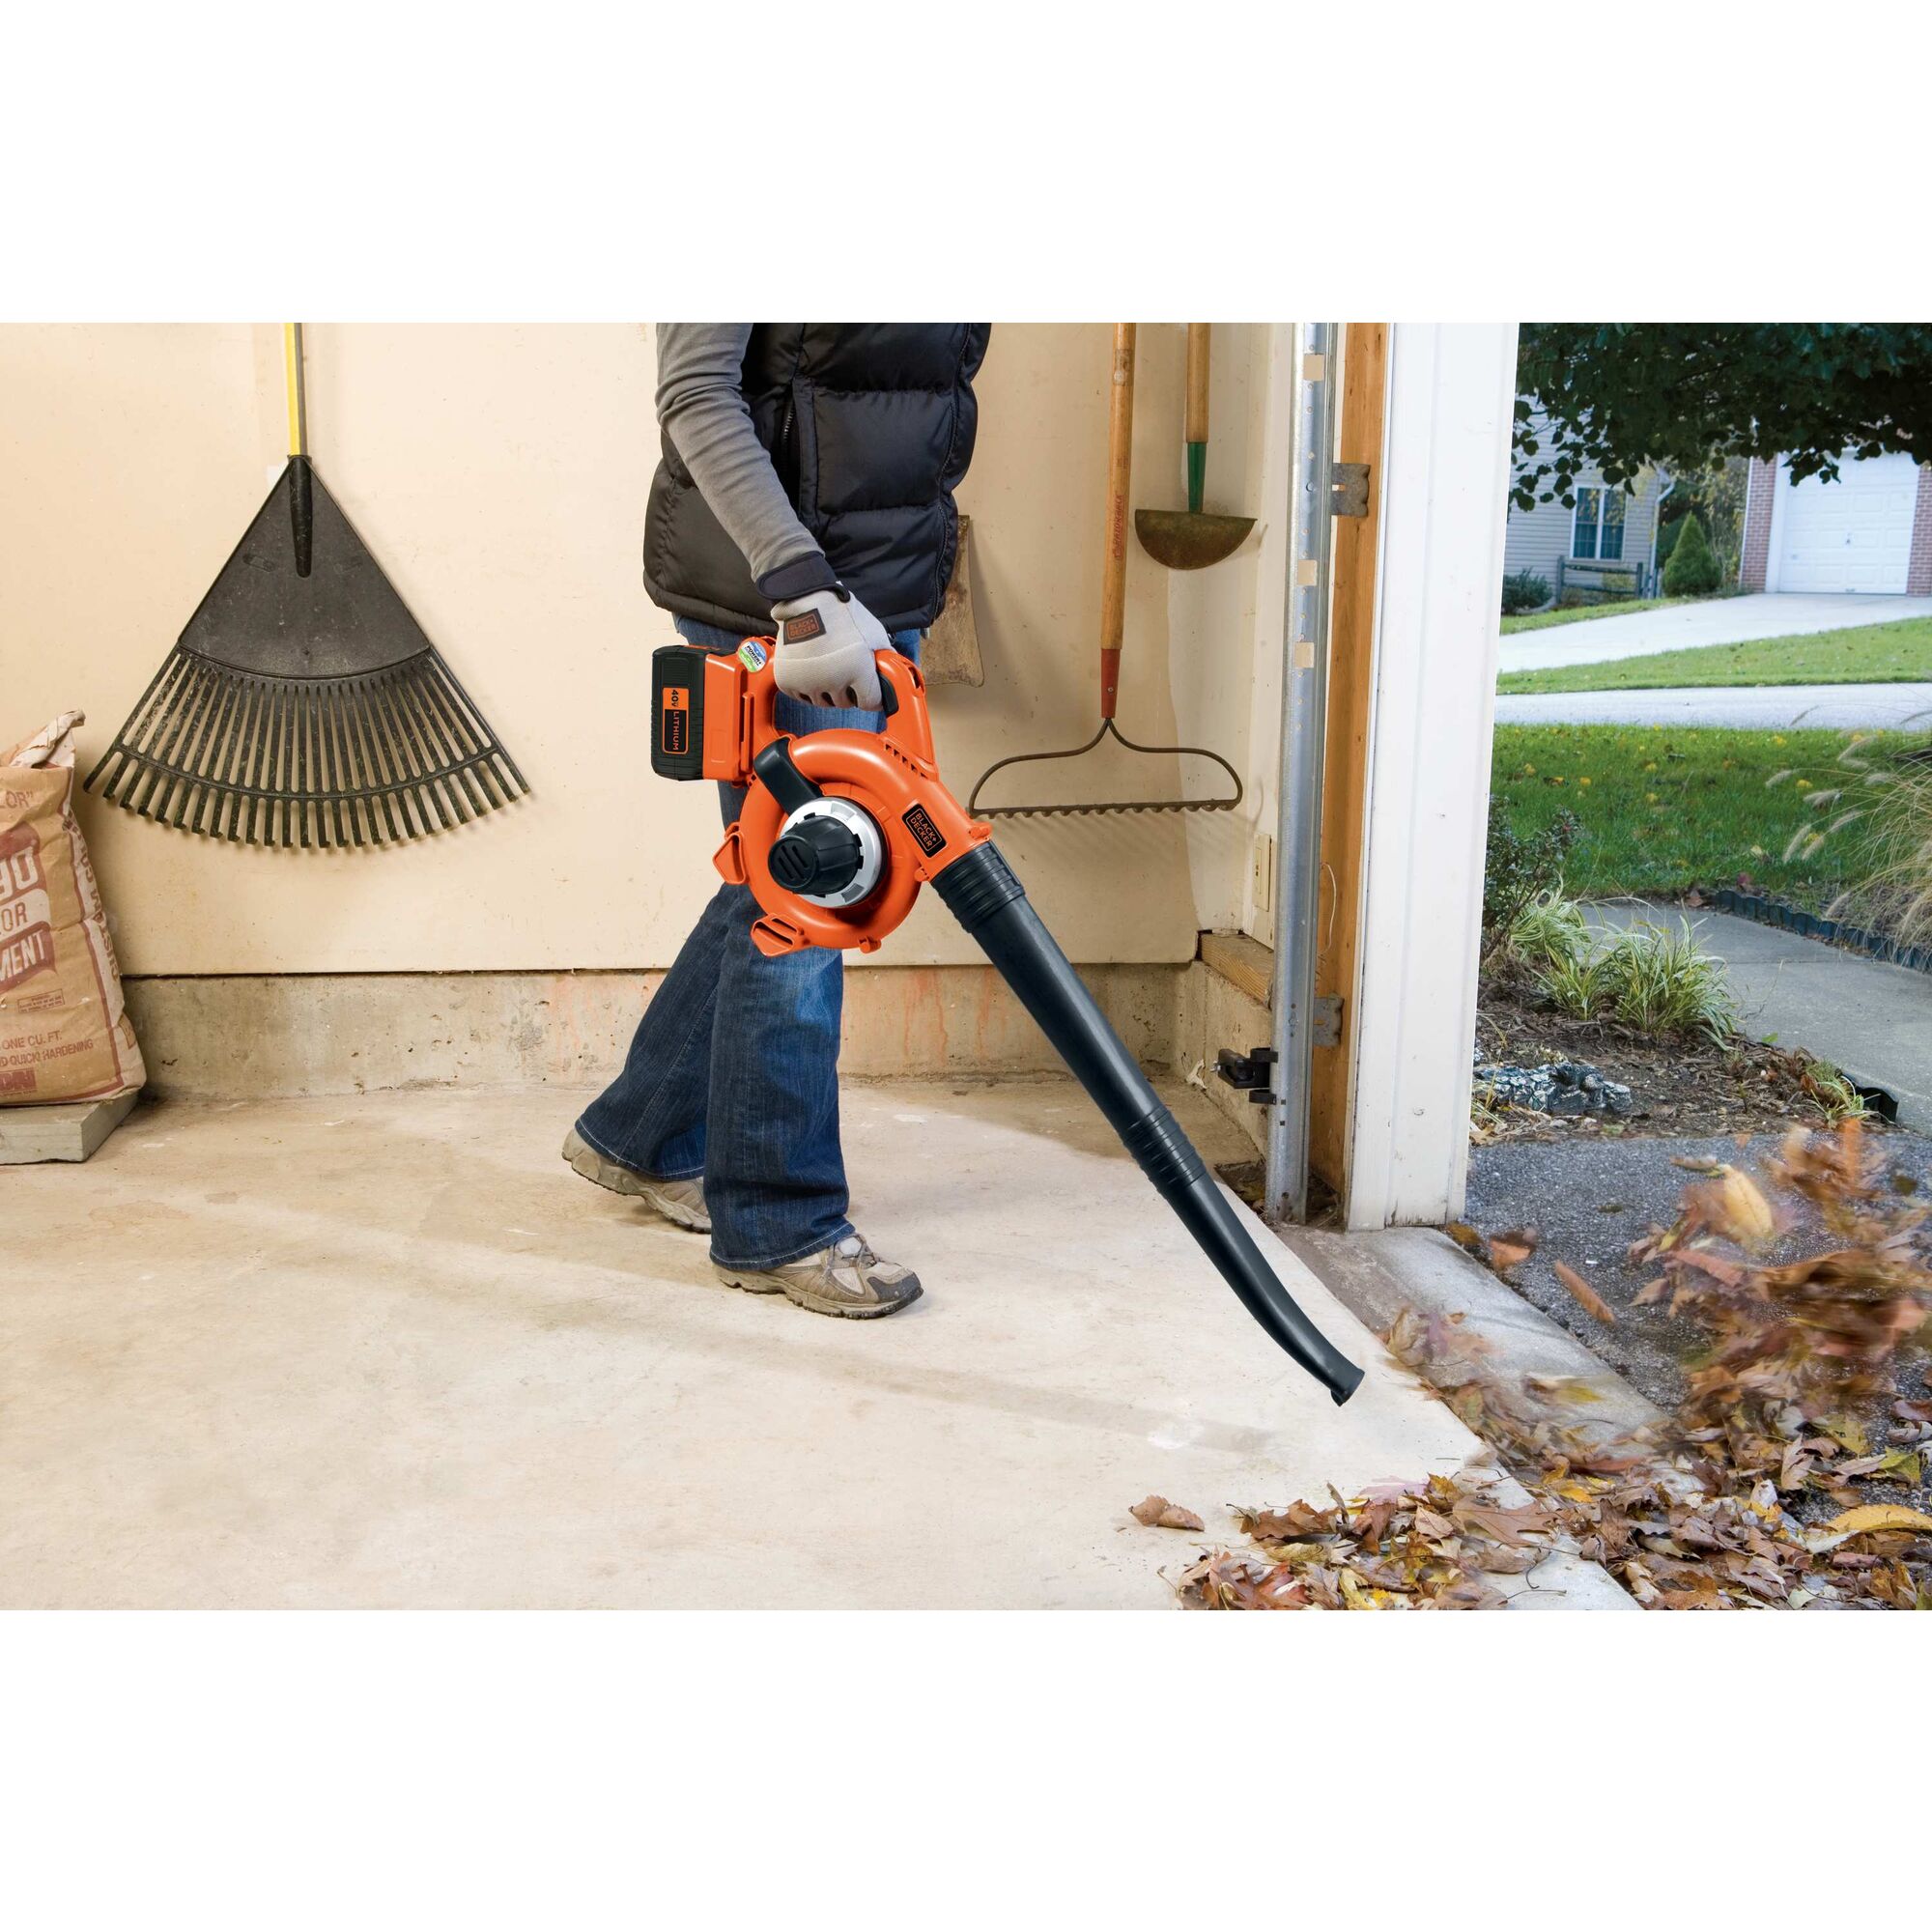 Man using Cordless Leaf Blower/Vacuum to blow leaves out of a garage.